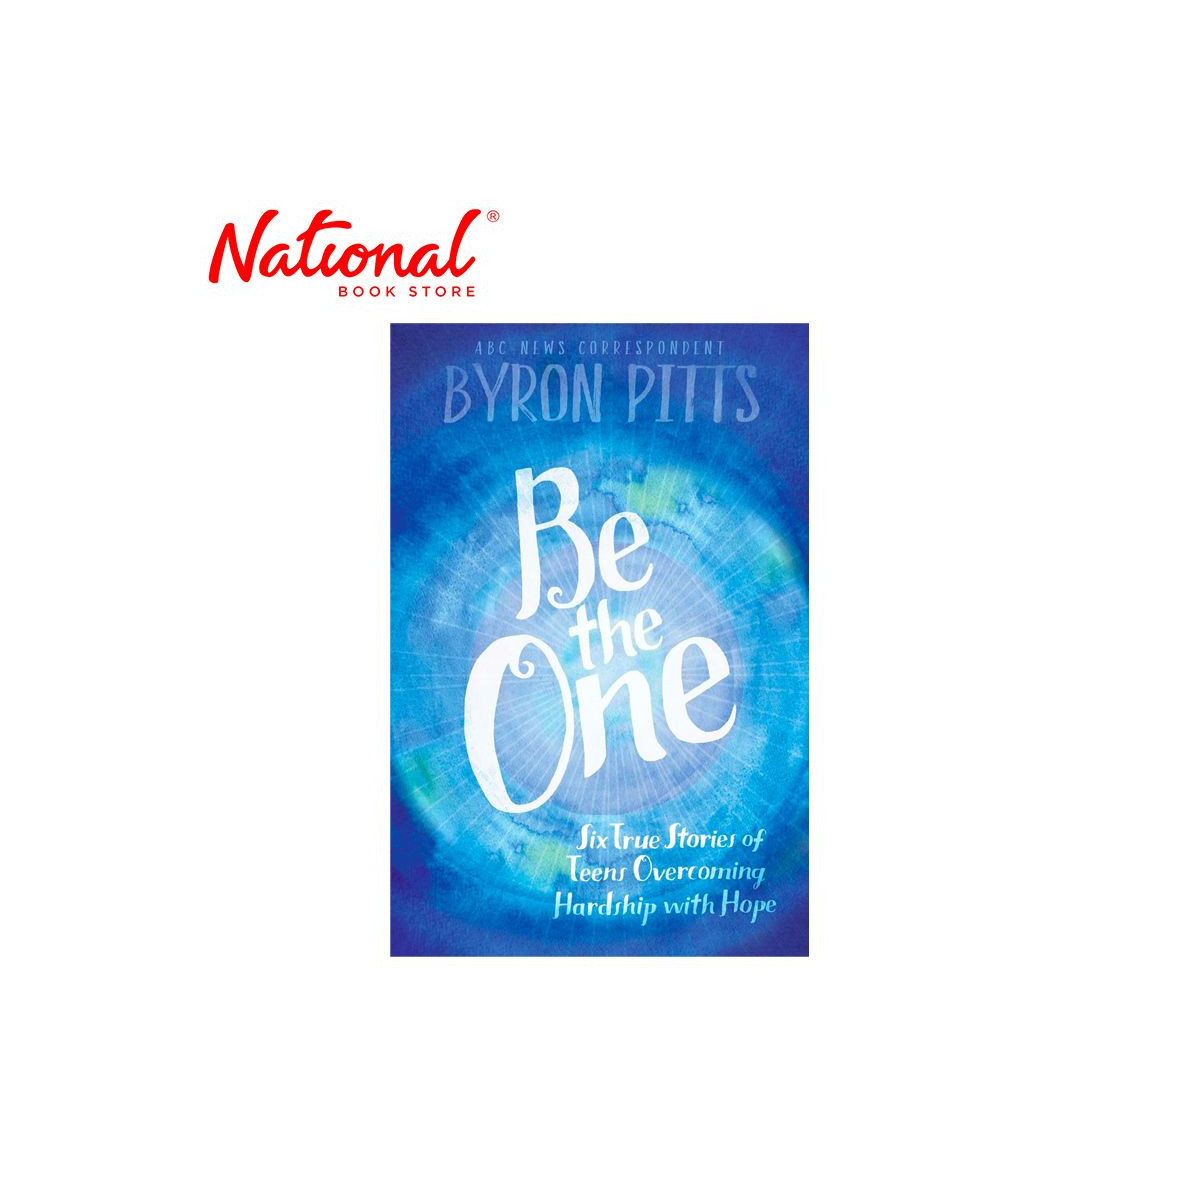 Be the One Trade Paperback by Byron Pitts - Teens - Health - Mind - Body